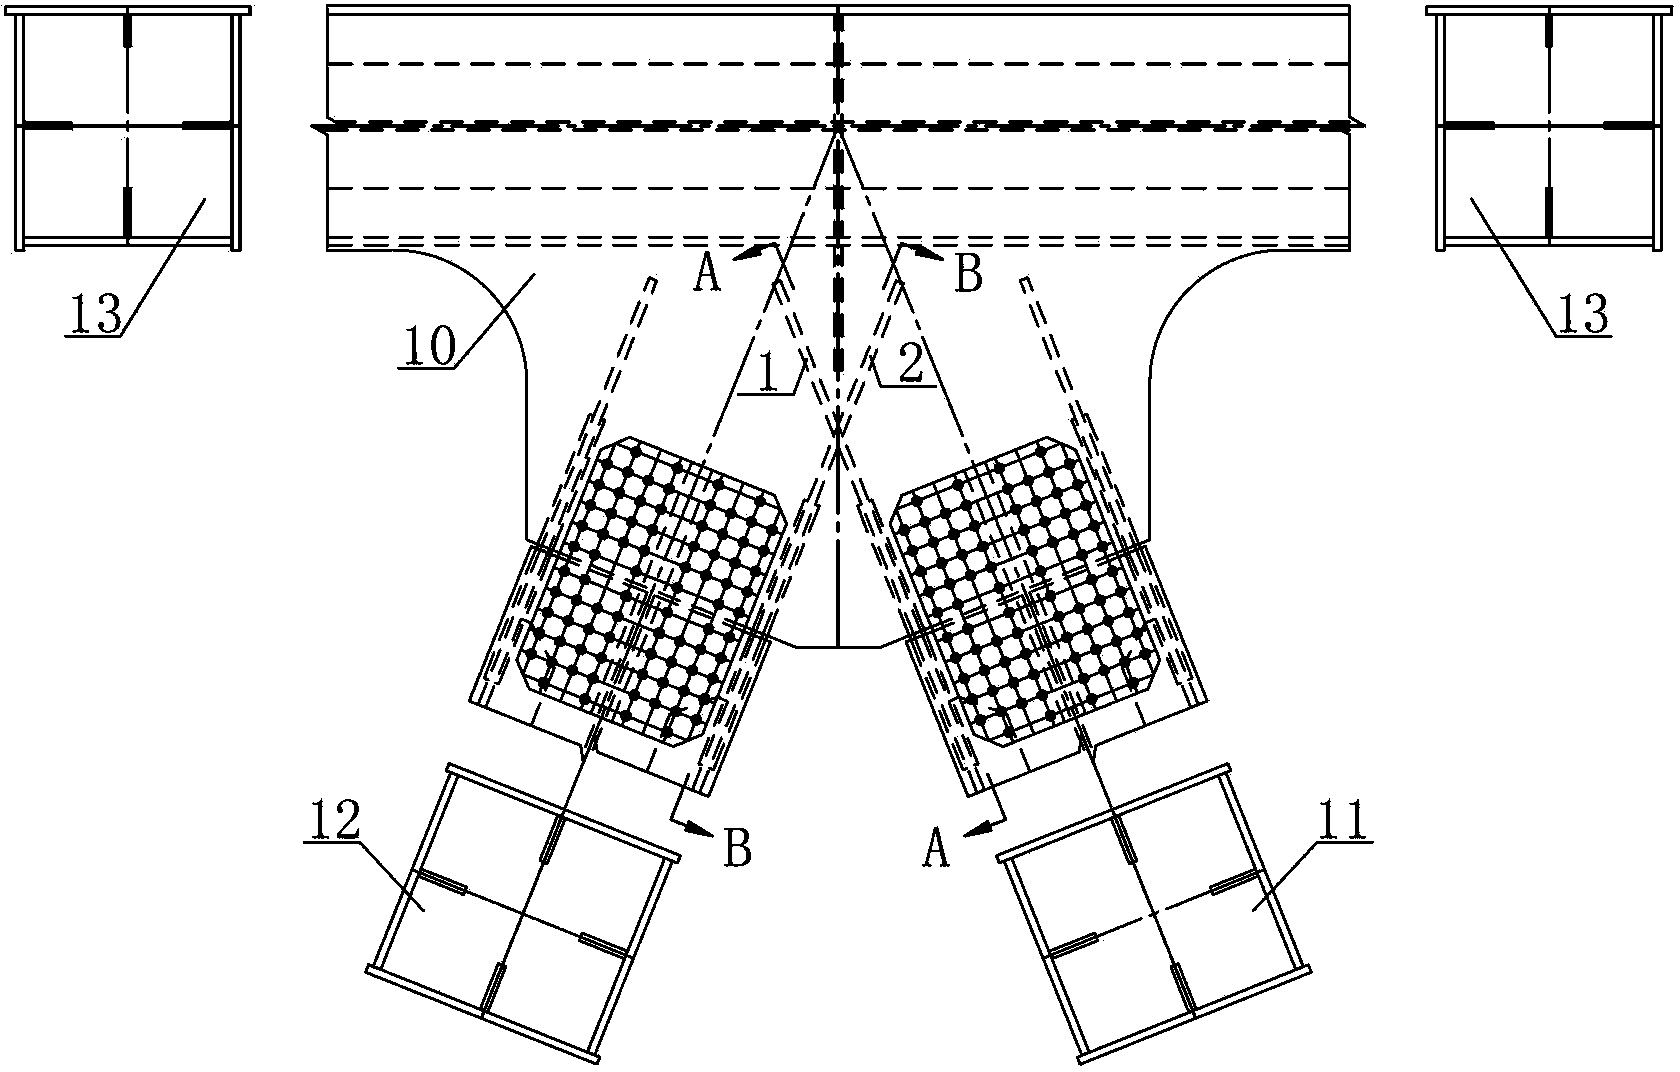 Web member intersecting and split joint connector structure in positions of steel truss girder bridge nodes